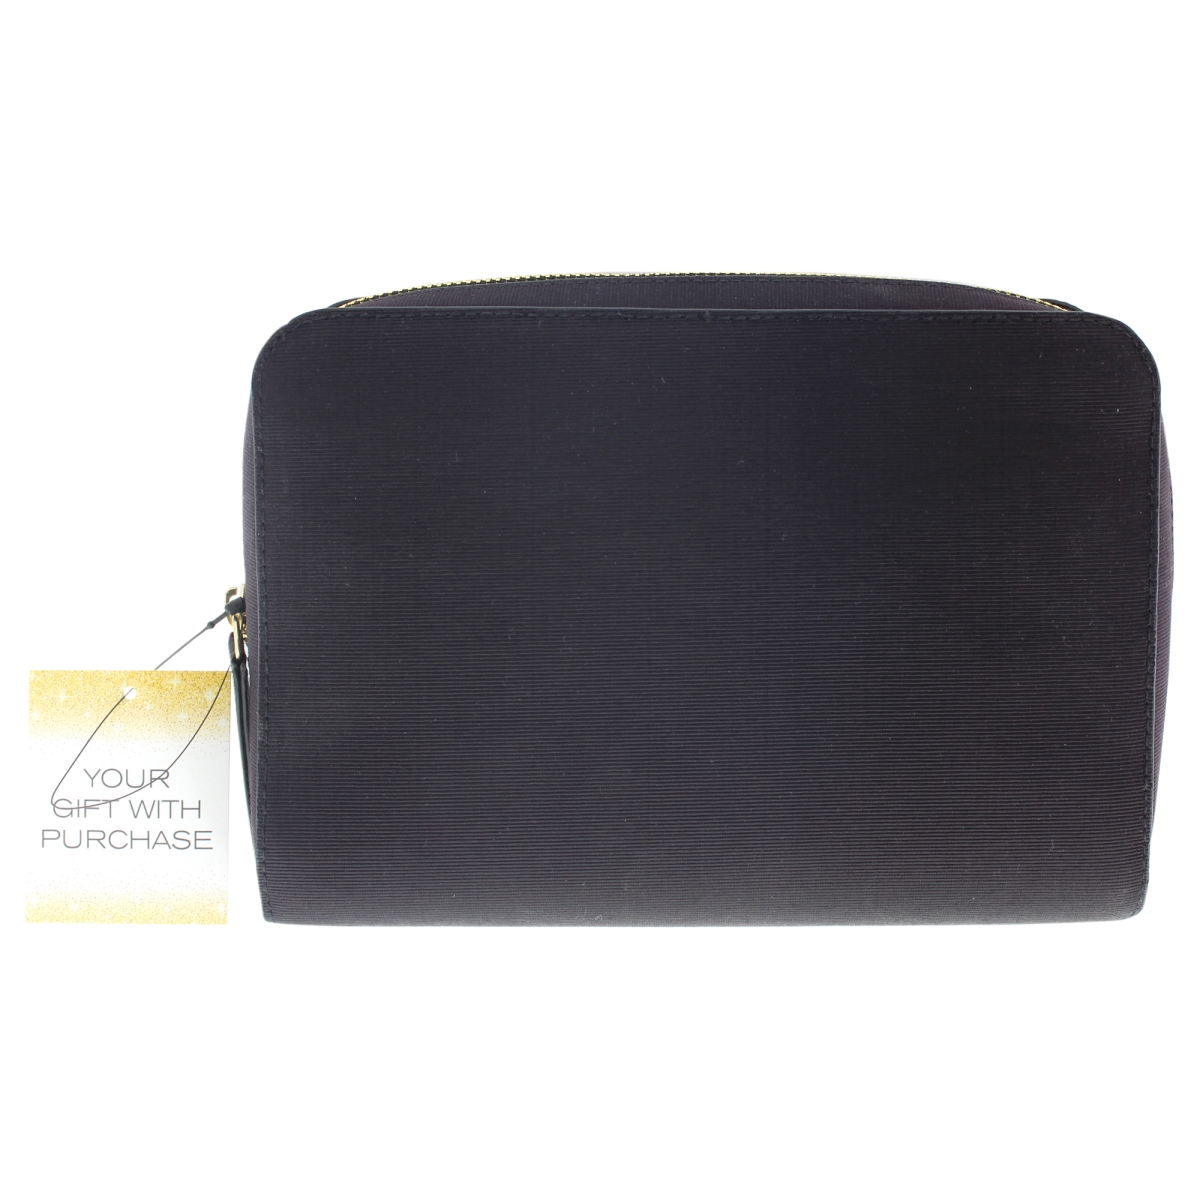 Picture of ECSG W-BG-1270 Cosmetic Bag - Black for Women